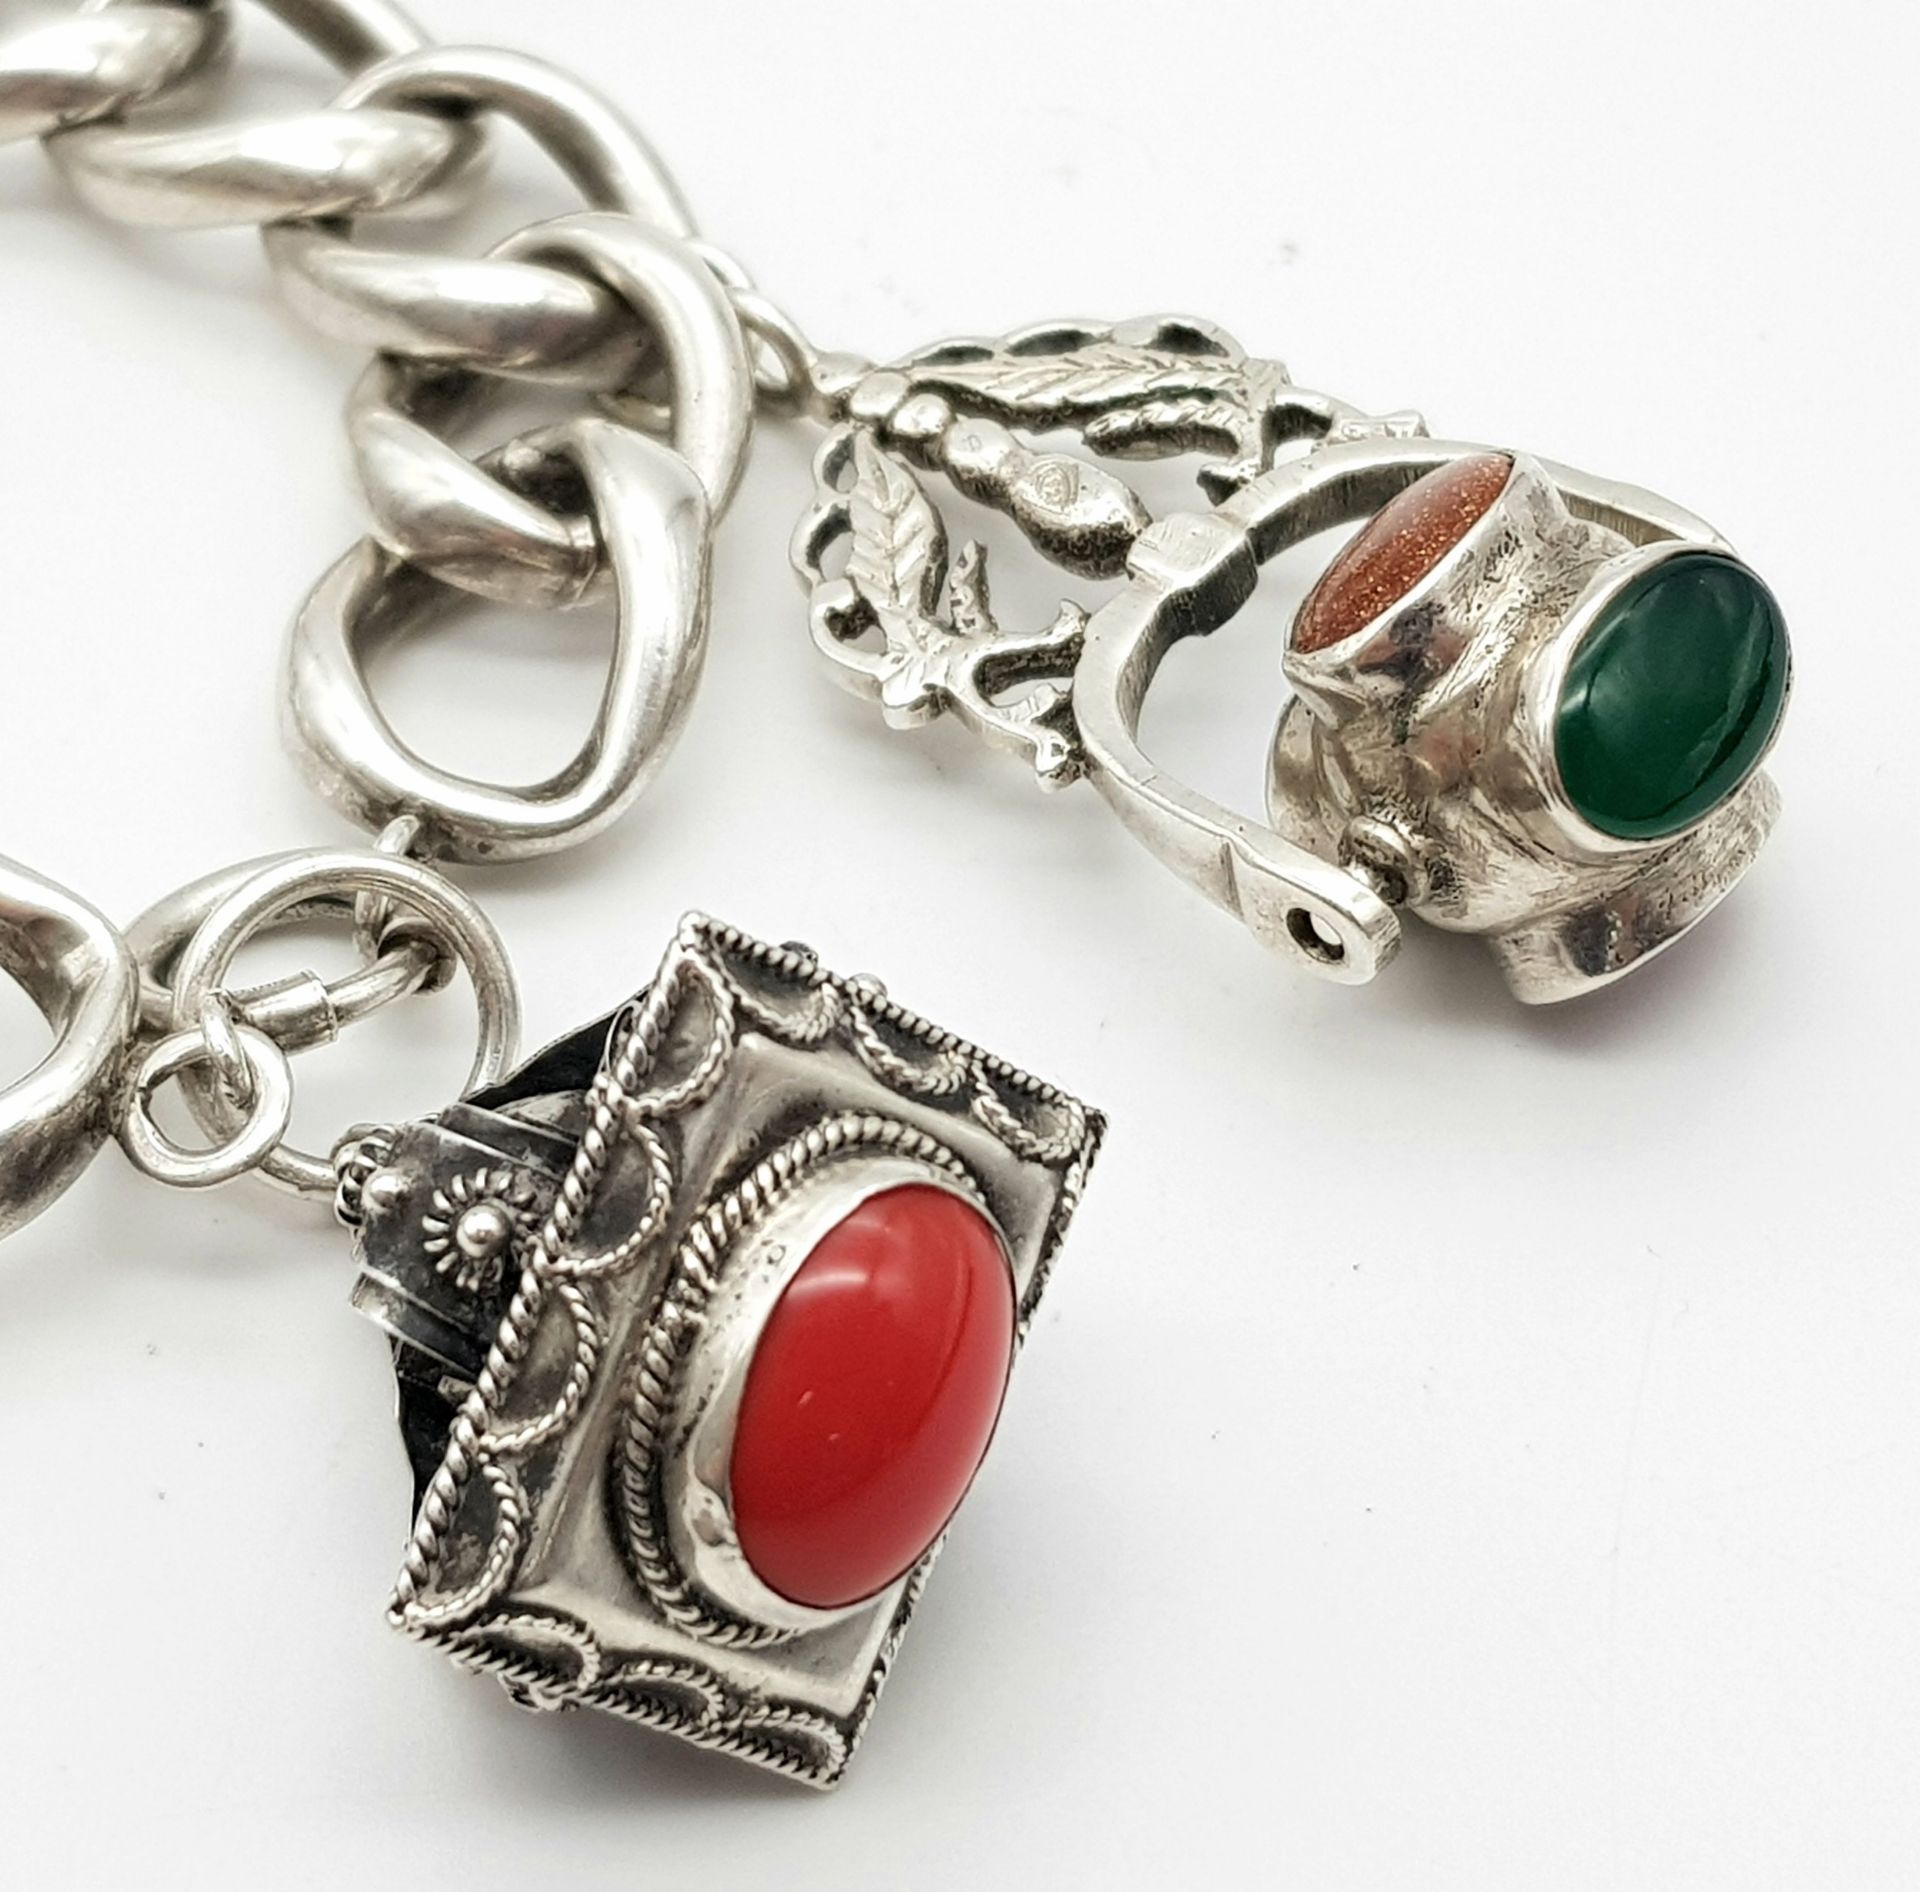 AN UNUSUAL SILVER CHARM BRACELET WITH LARGE STONE SET CHARMS (SEE PHOTO) 90.6gms - Image 2 of 4